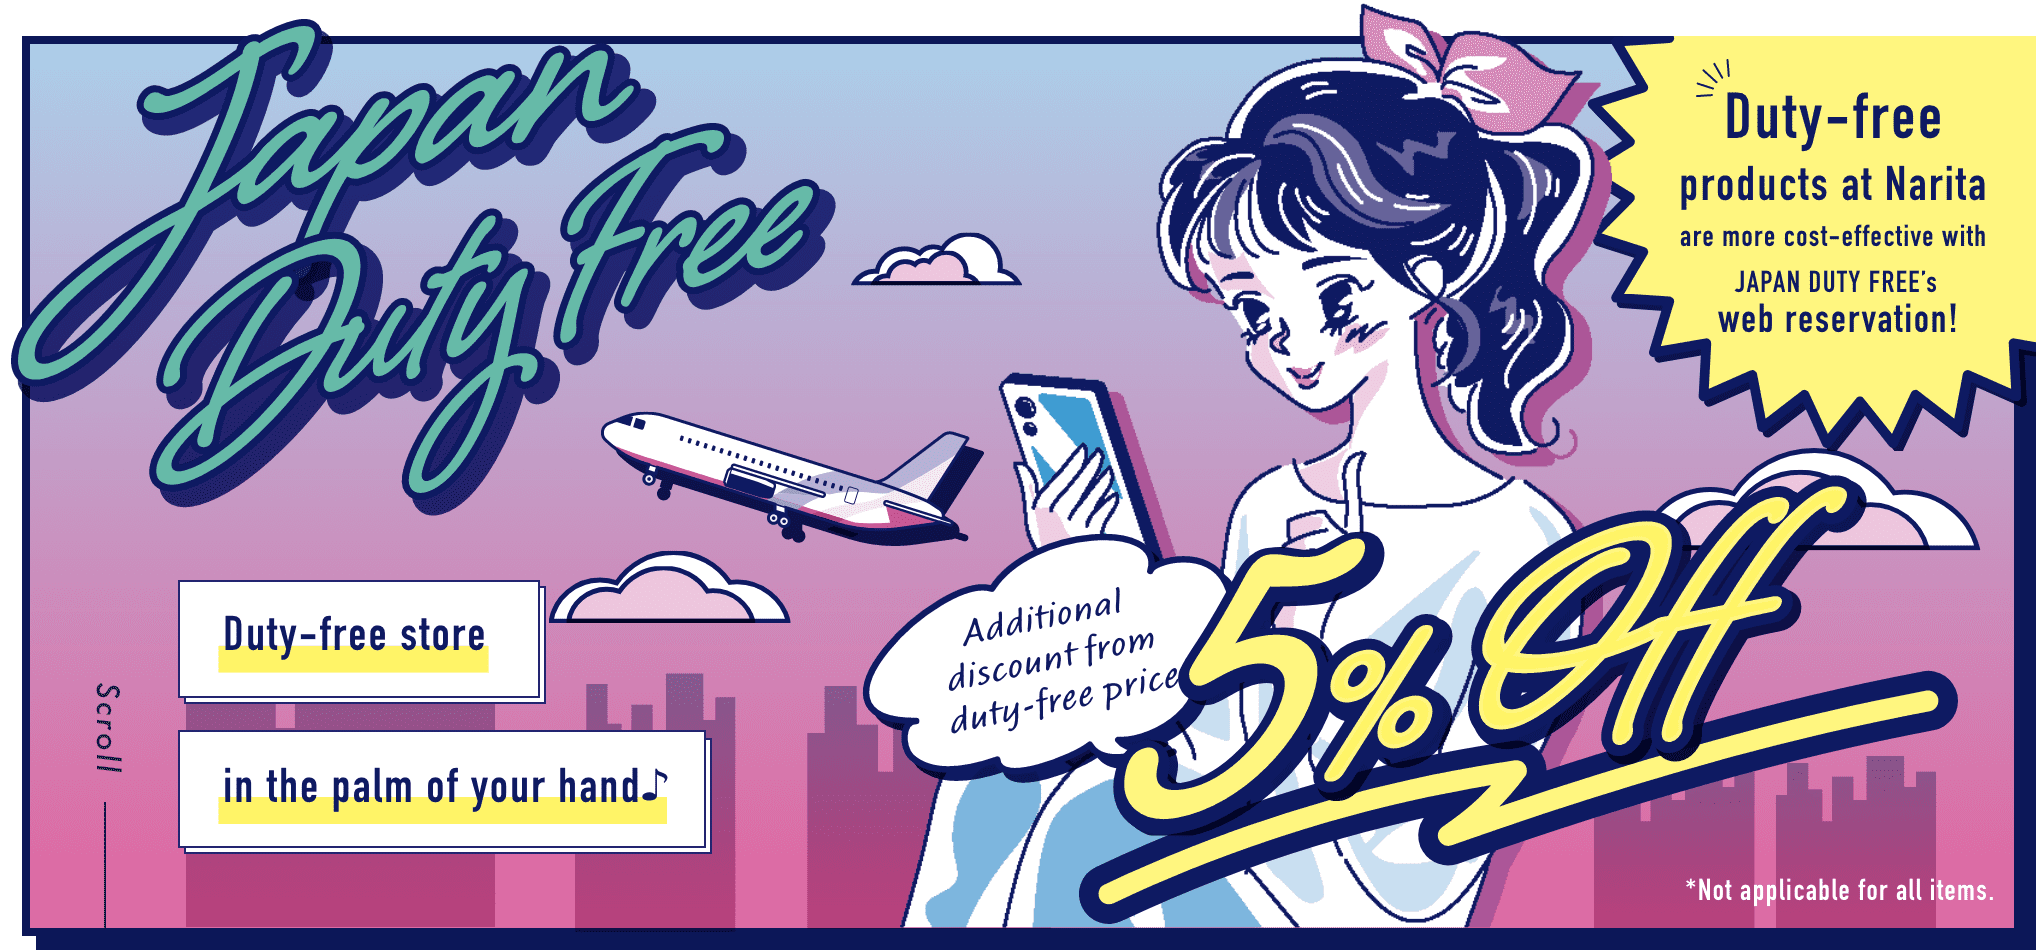 Tax-free shops in the palm of your hand♪